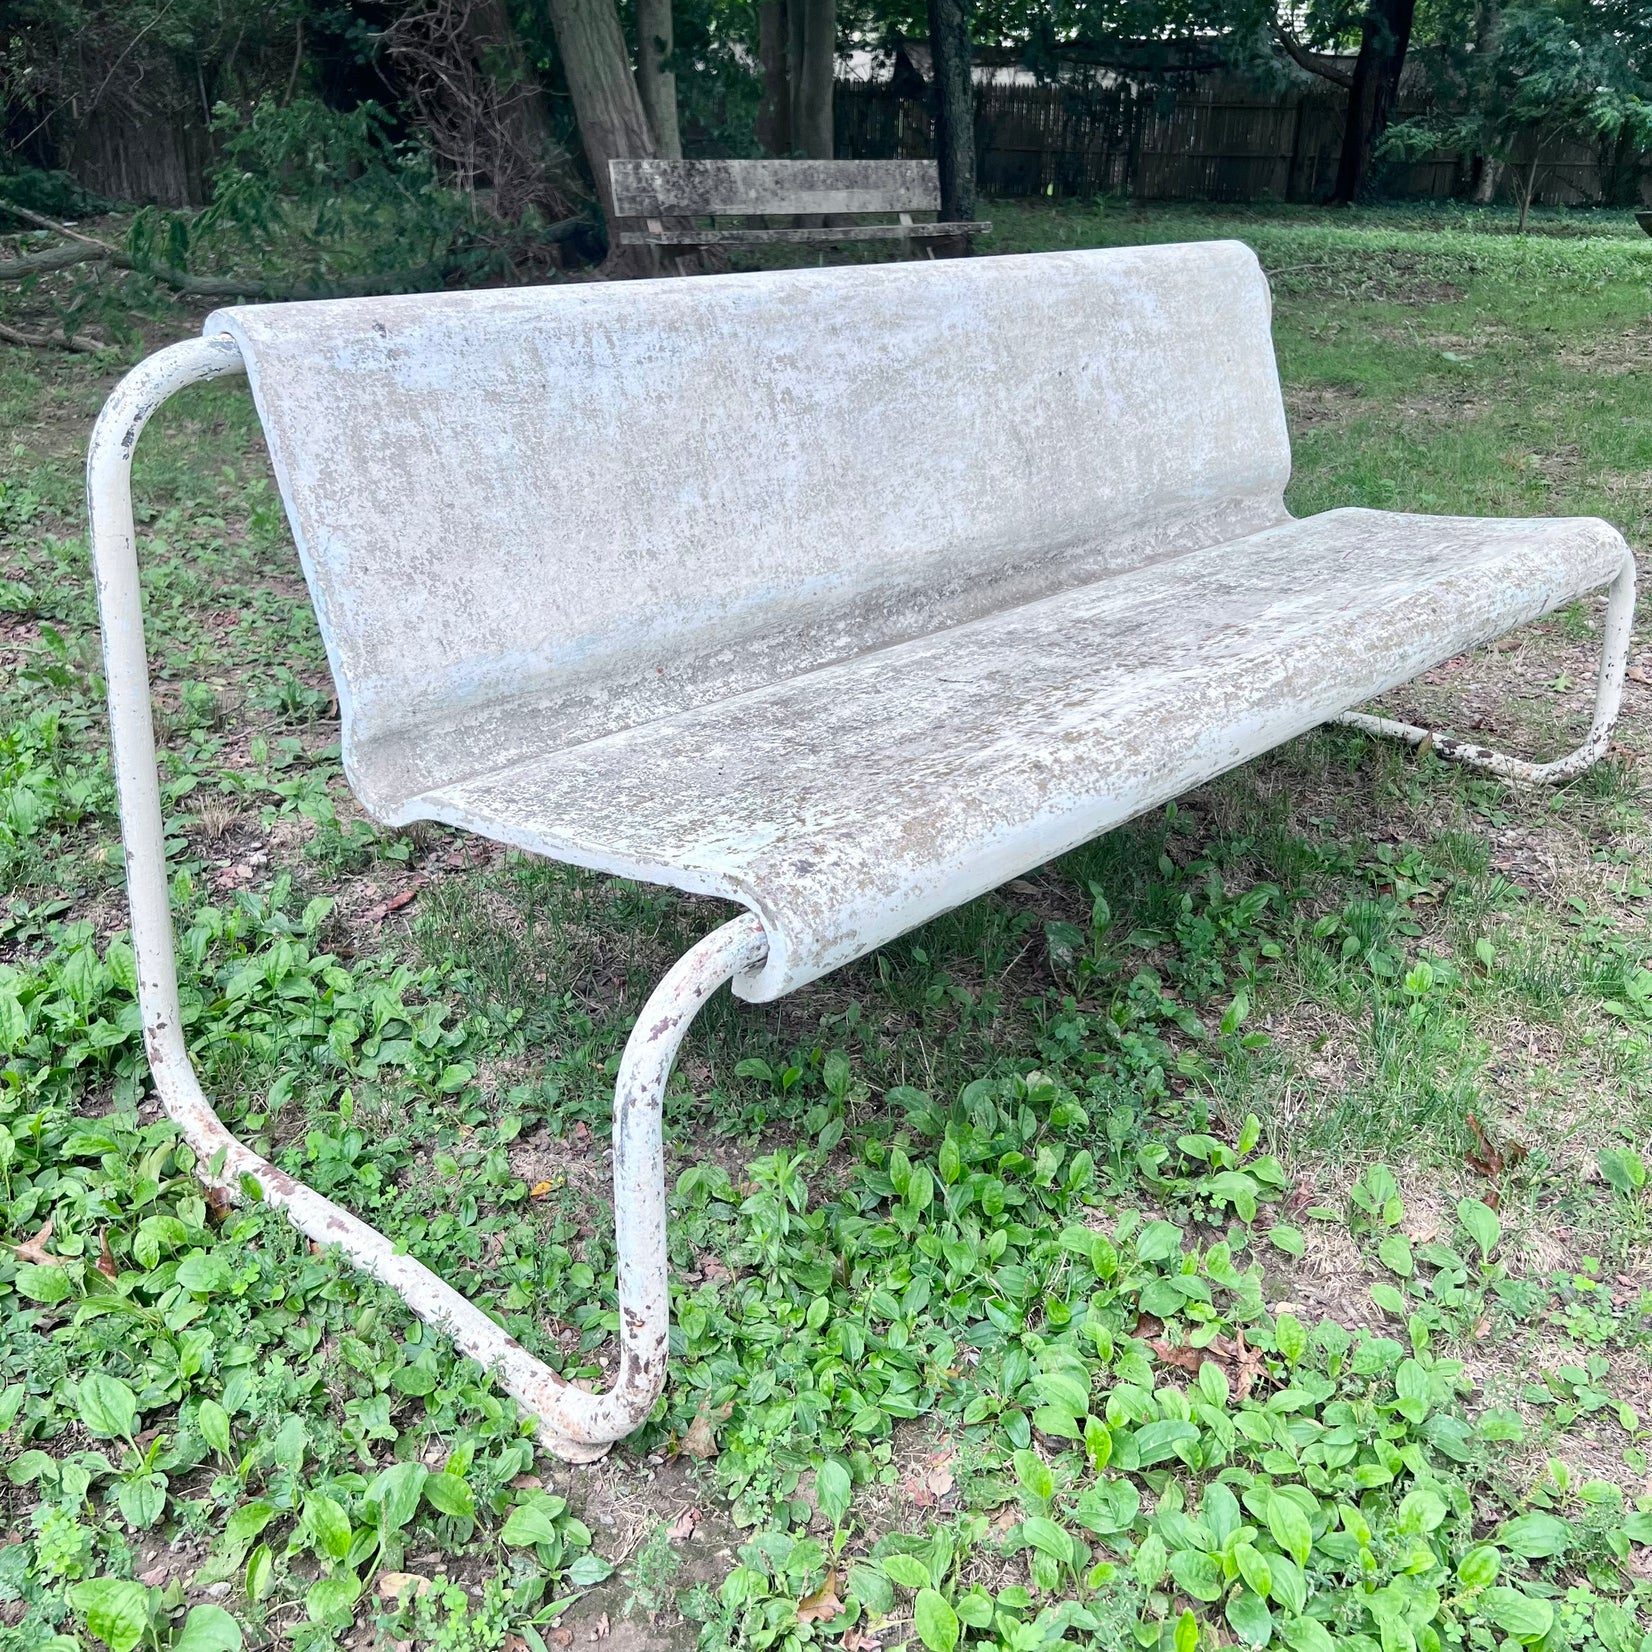 Willy Guhl Concrete and Steel Floating Bench, 1960s Switzerland